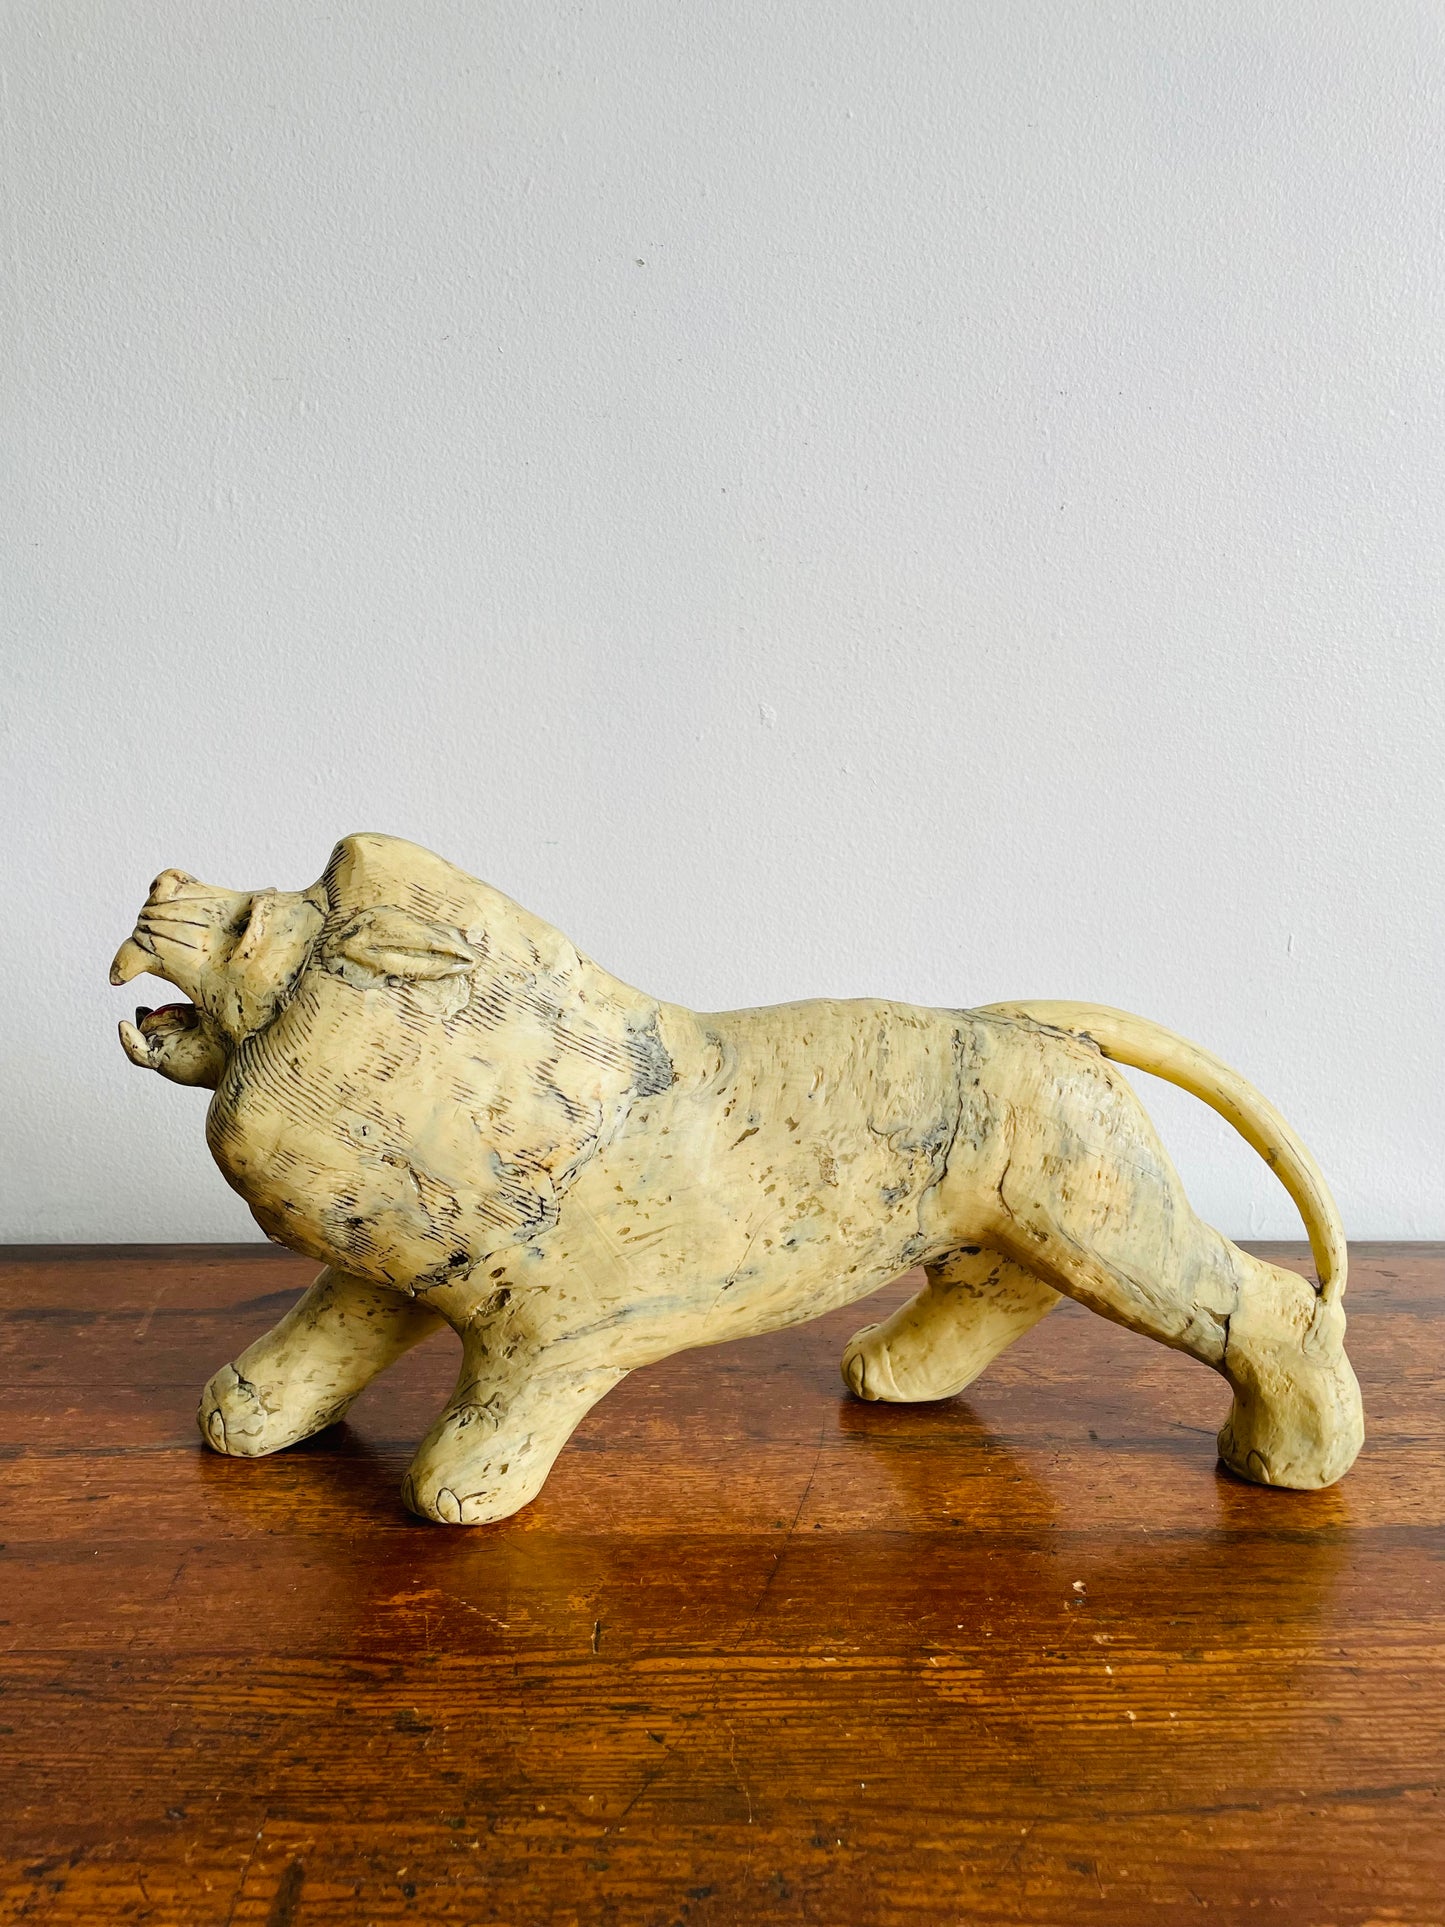 Handmade Roaring Lion Statue Figurine Made from Crushed Oyster Shells